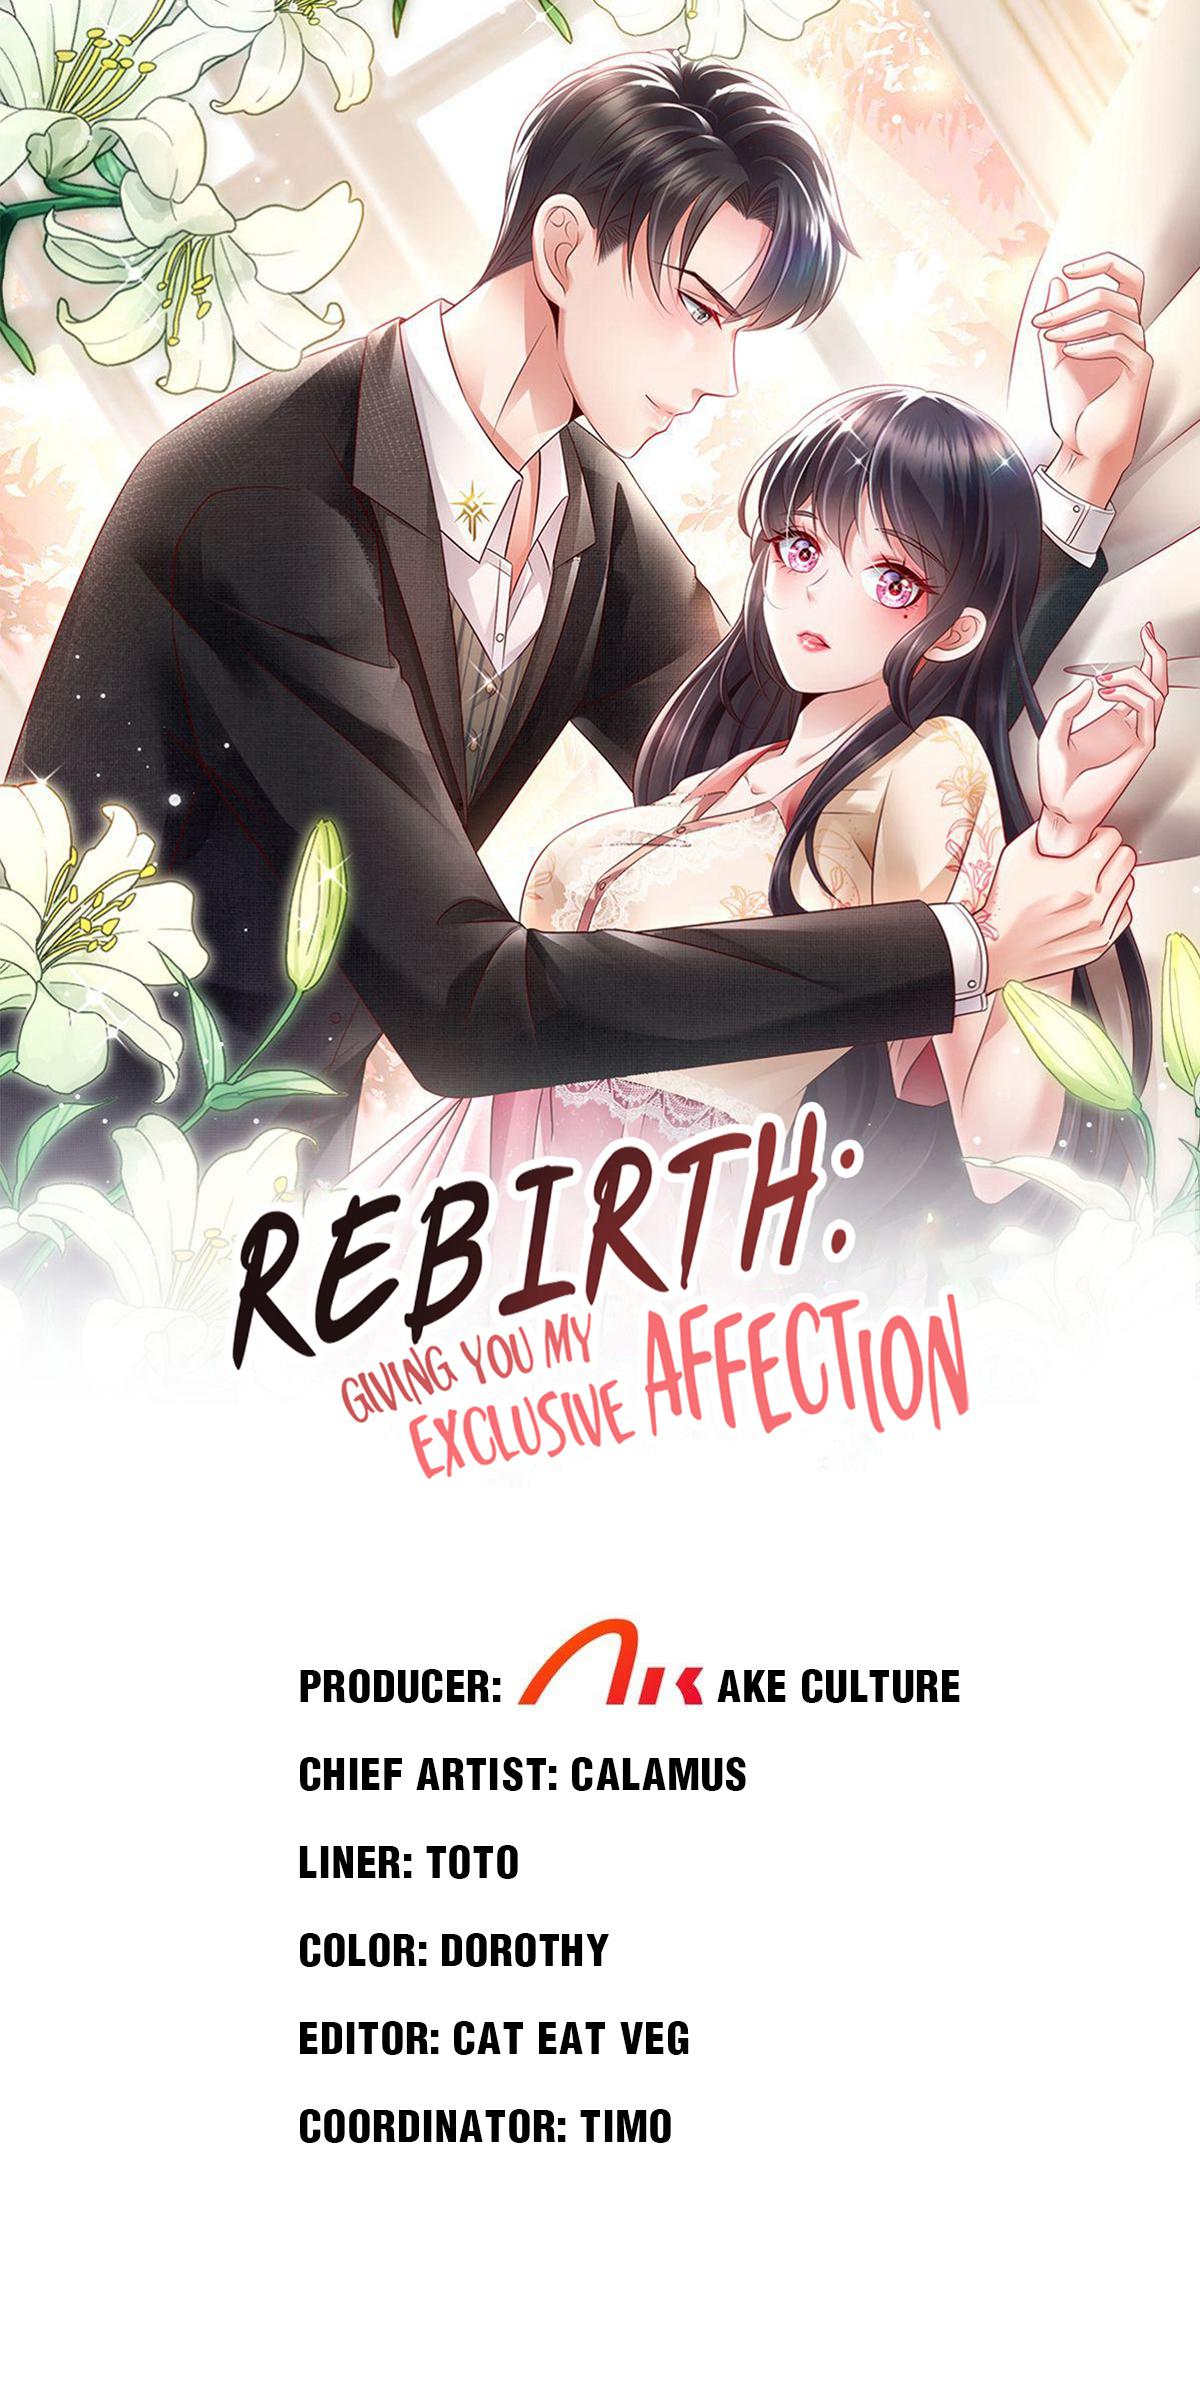 Rebirth: Giving You My Exclusive Affection 205